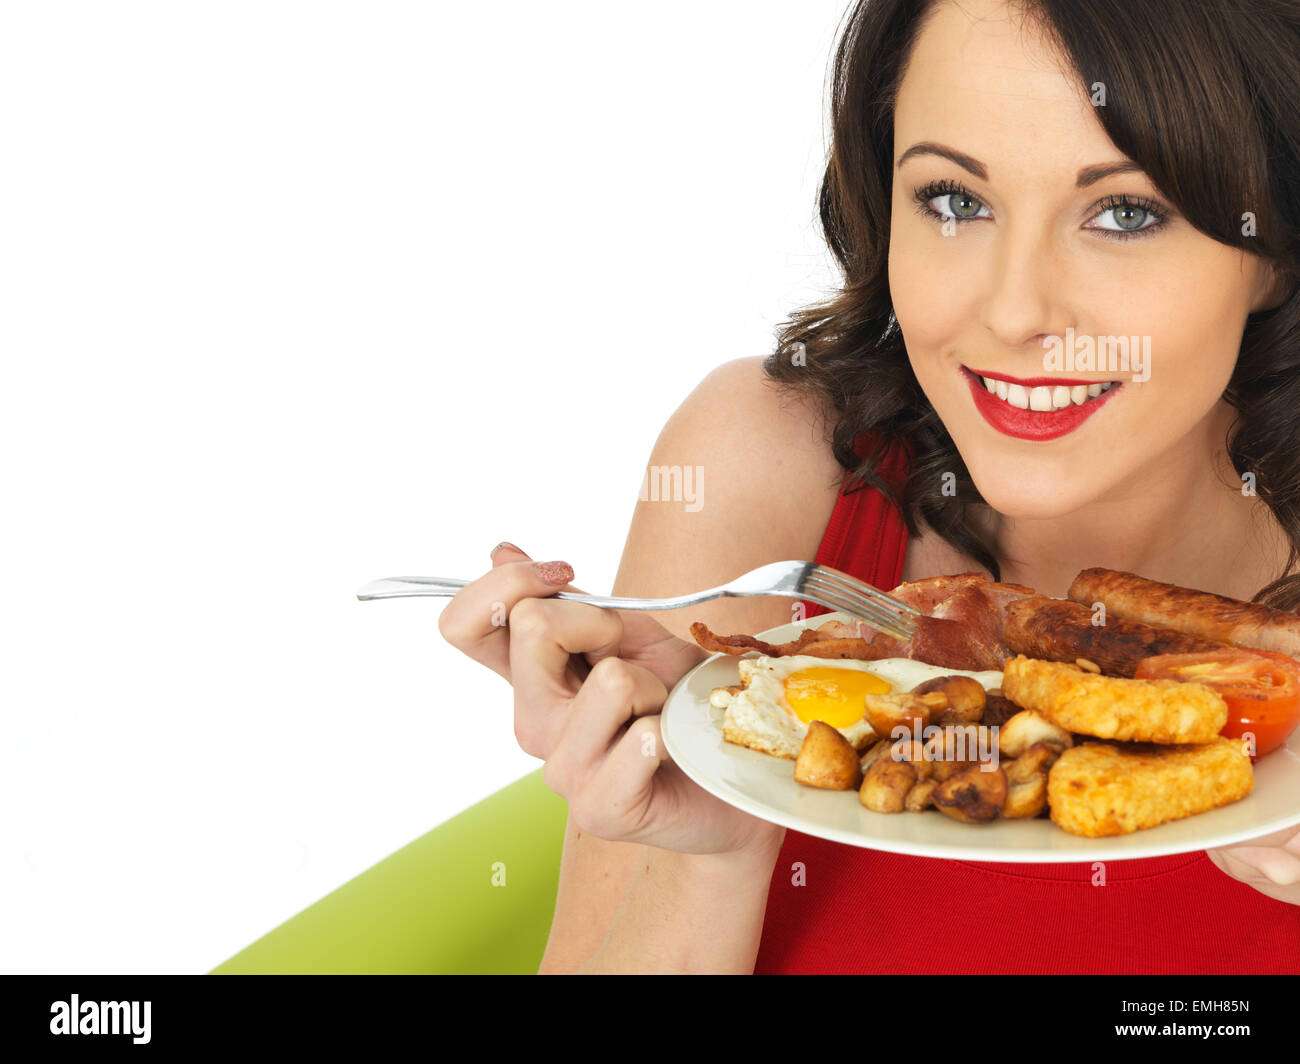 Stock Photo - Young Attractive Woman Eating a <b>Full English</b> Breakfast - young-attractive-woman-eating-a-full-english-breakfast-EMH85N